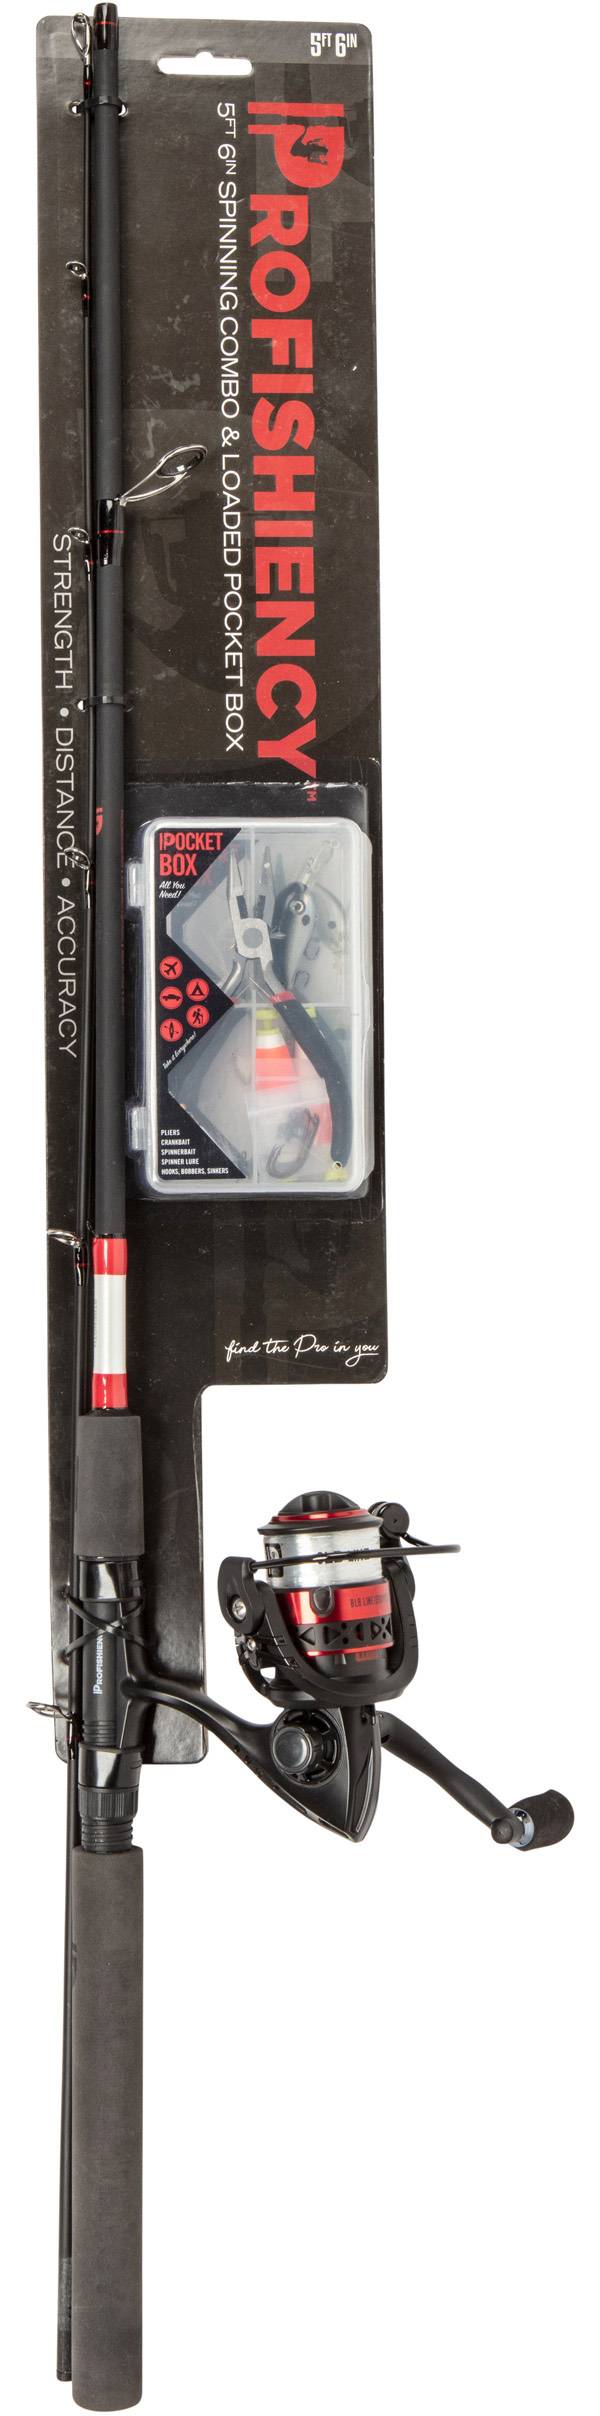 Profishiency Youth Spinning Combo Kit product image